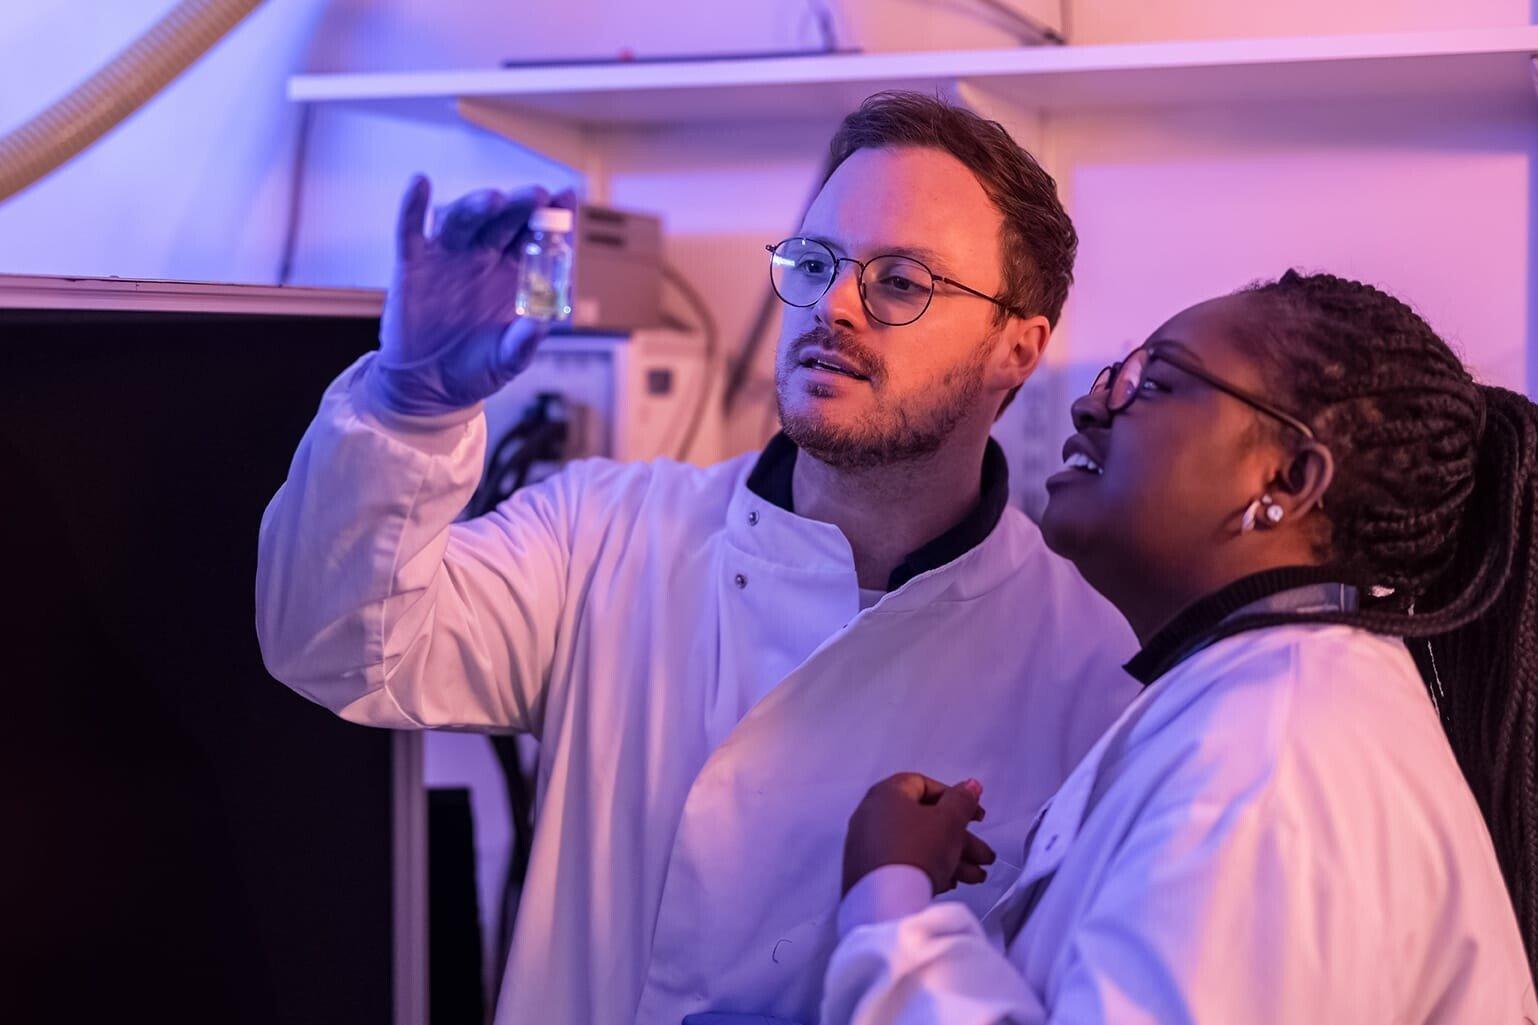 Two researchers wearing lab coats are closely observing a vial.